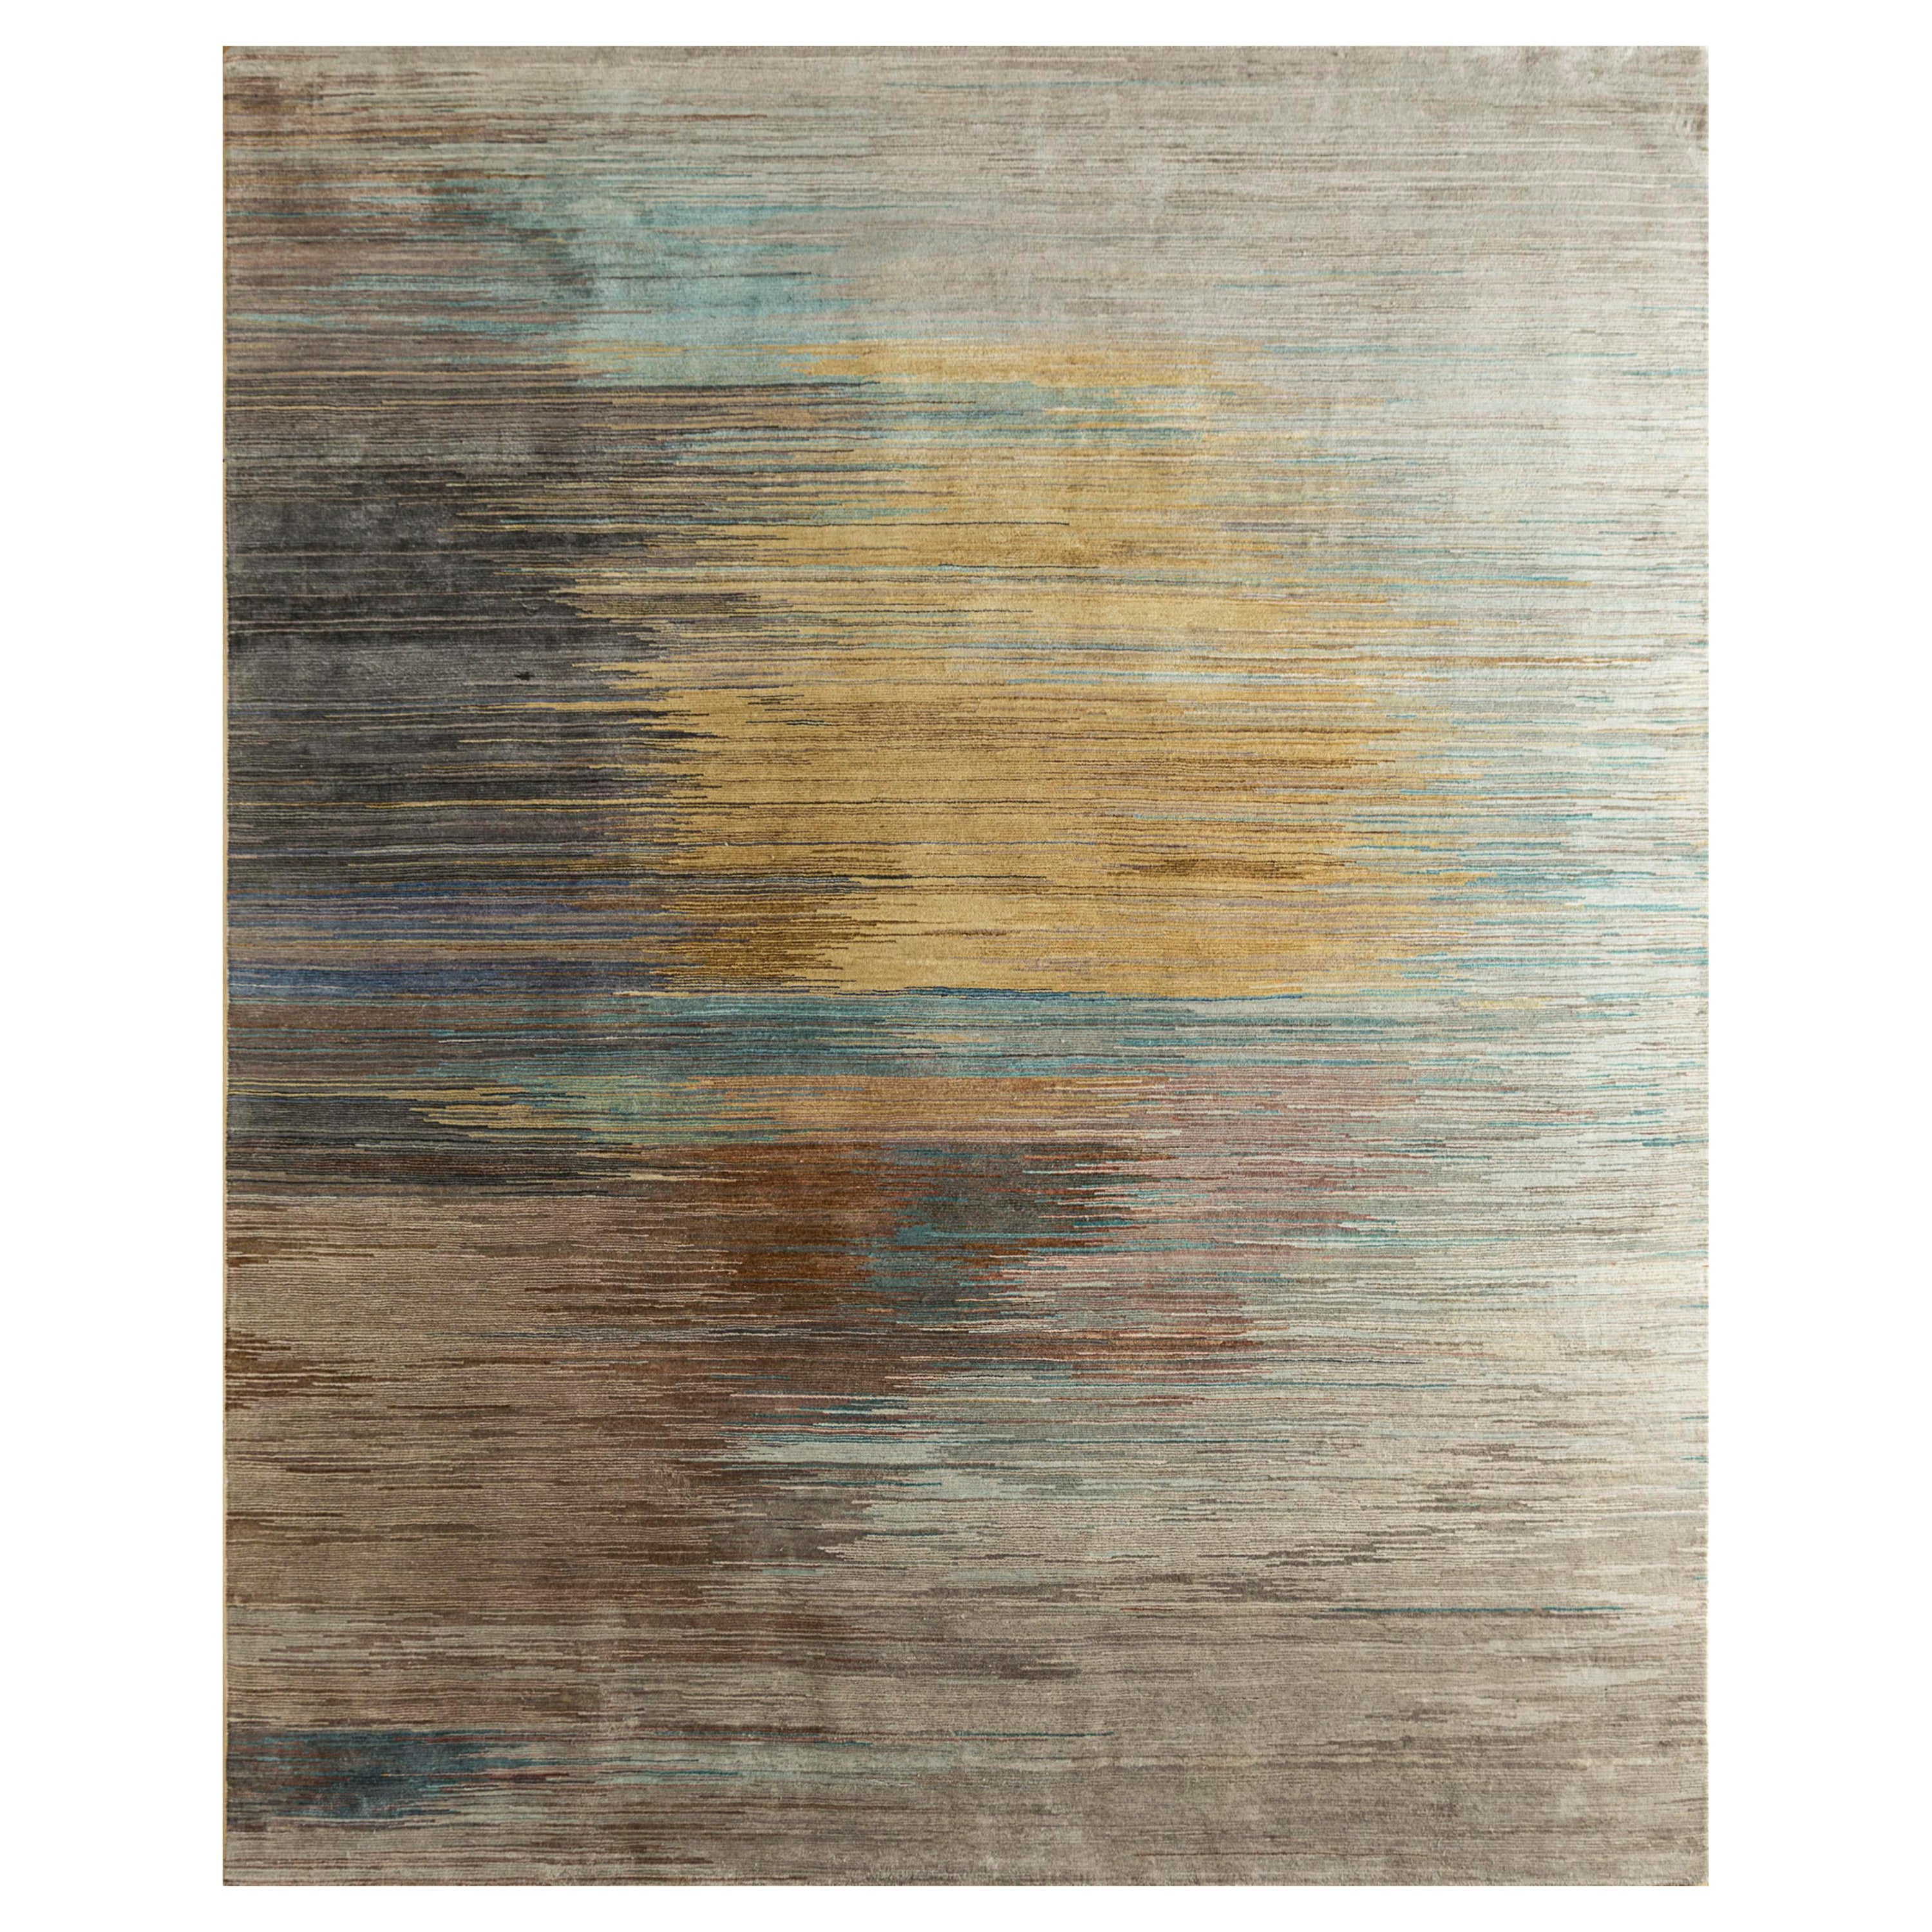 Perspective Harmony Antique White & Light Sea Mist 168x240 cm Handknotted Rug